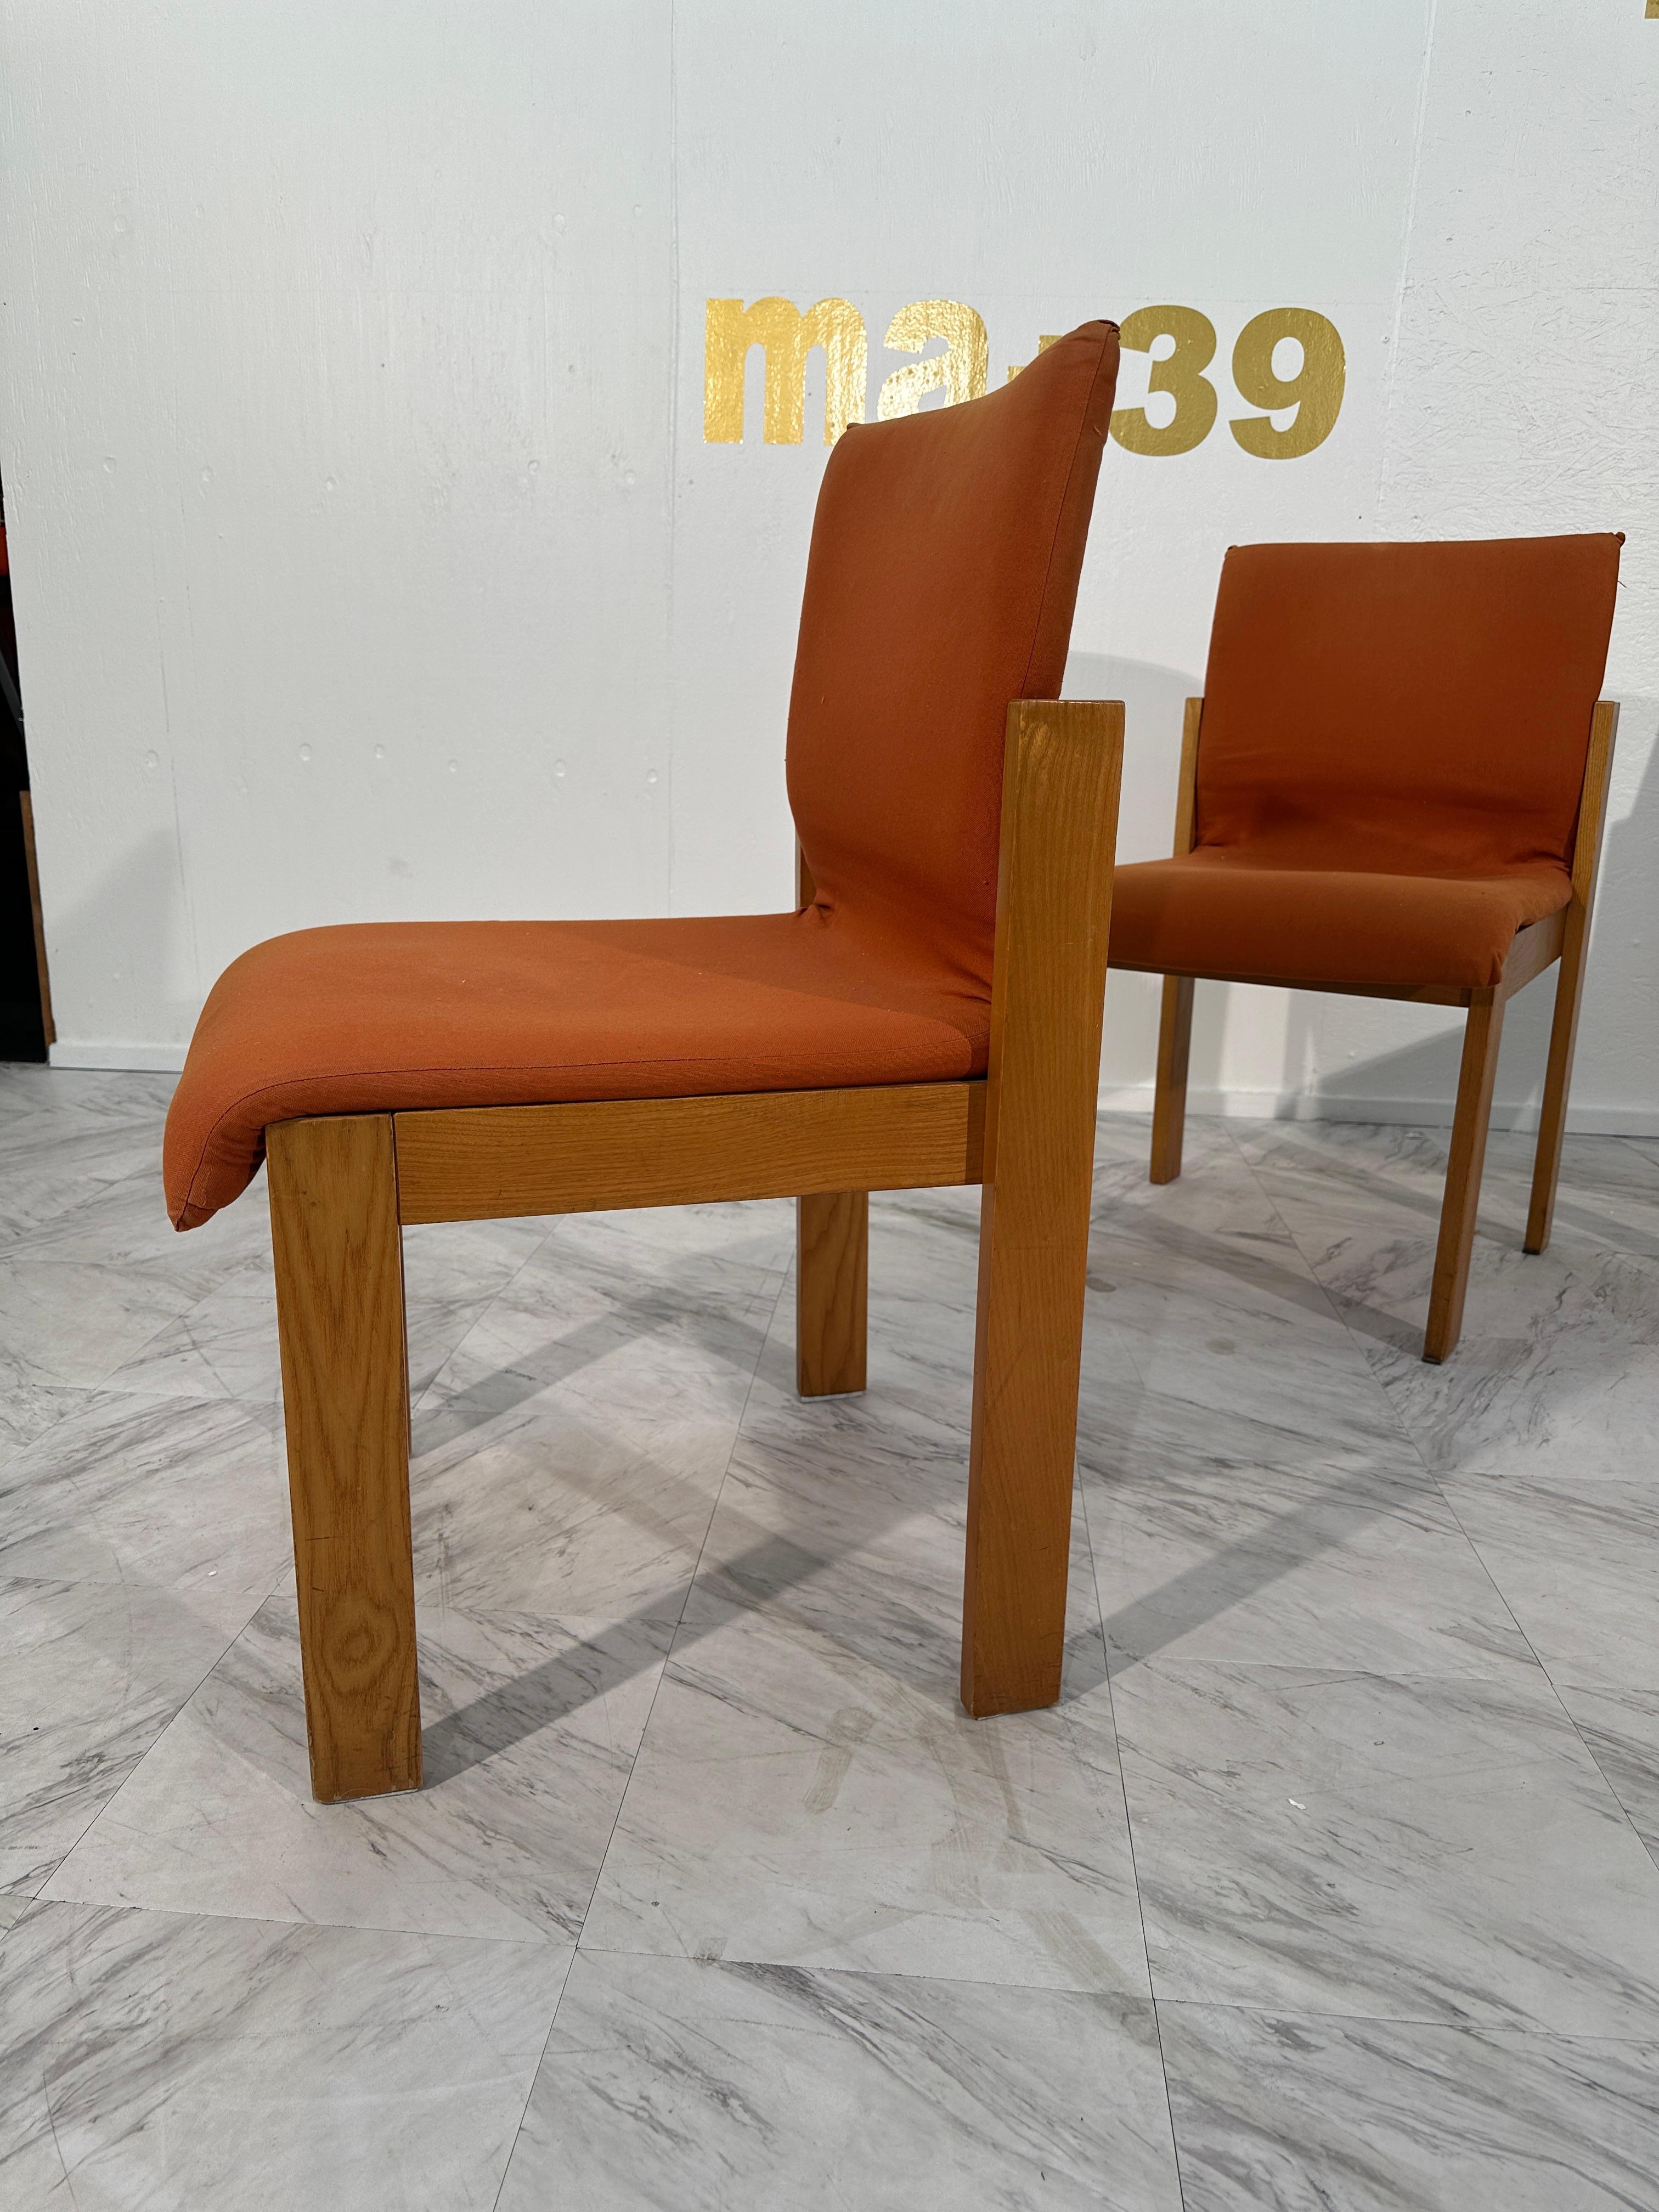 Italian Set of 4 Unique Wood Dining Chairs By F.lli Saporiti 1960s For Sale